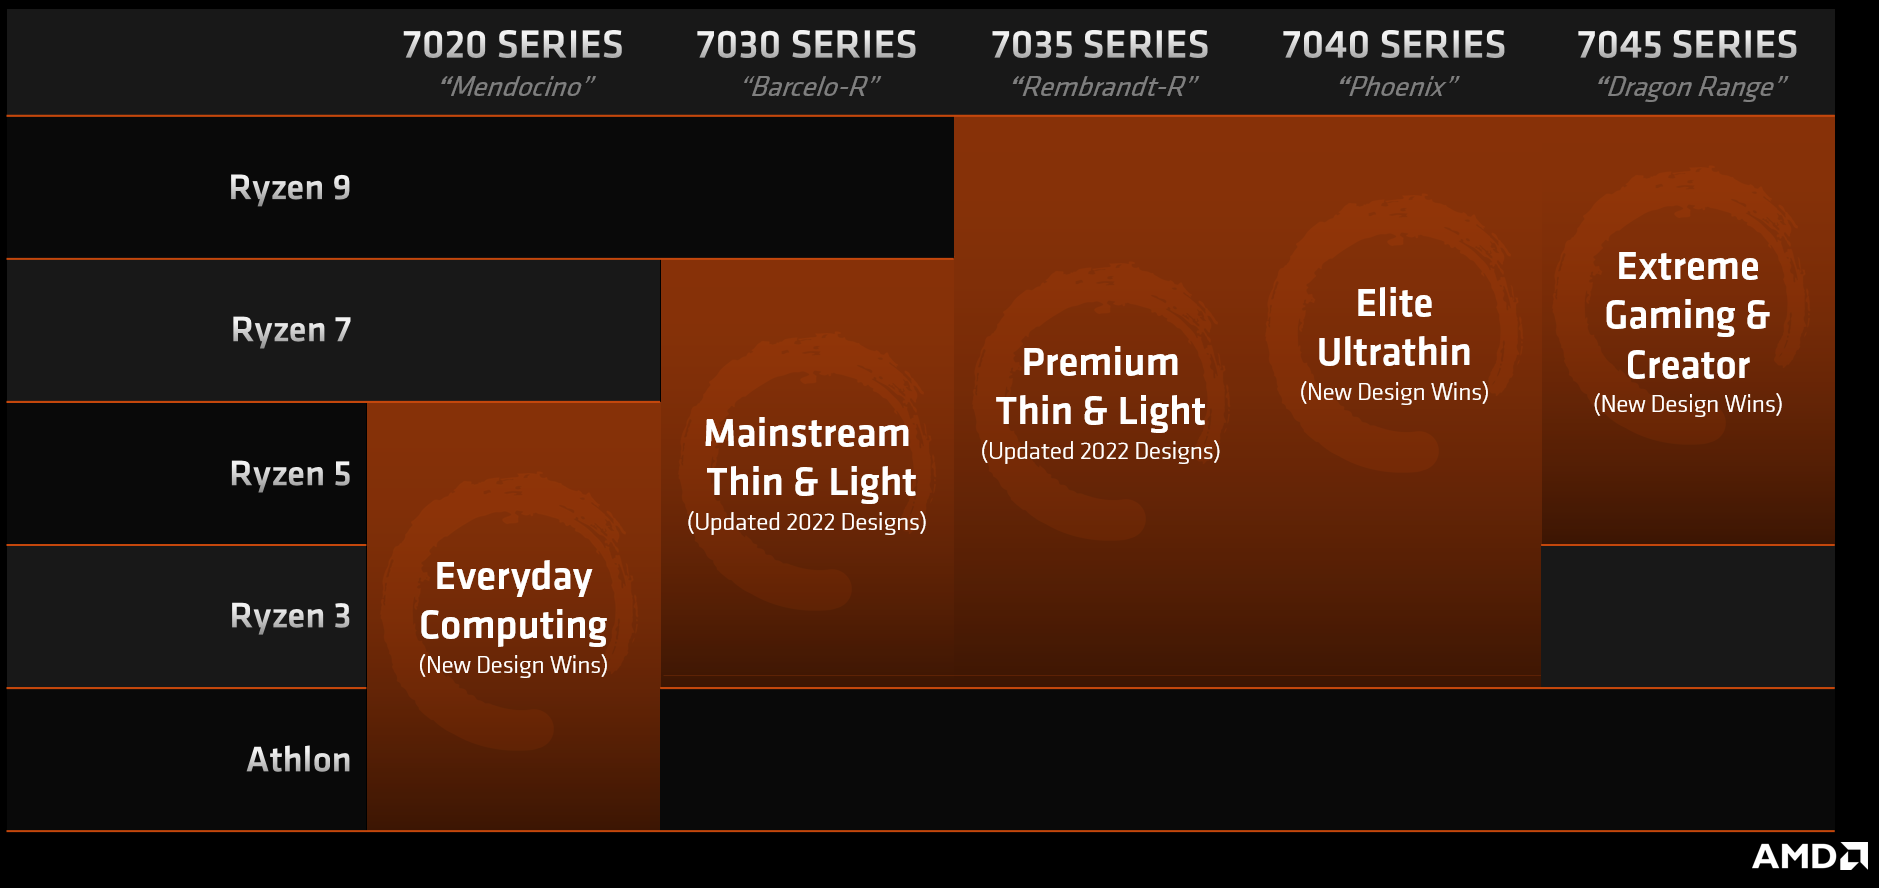 An infographic by AMD categorizes various Ryzen mobile processor series for different market segments. The 7020 series targets everyday computing, the 7030 series for mainstream thin and light laptops, the 7035 series for premium thin and light designs, the 7040 series as elite ultrathin, and the 7045 series for extreme gaming and creators, each with updated design wins.